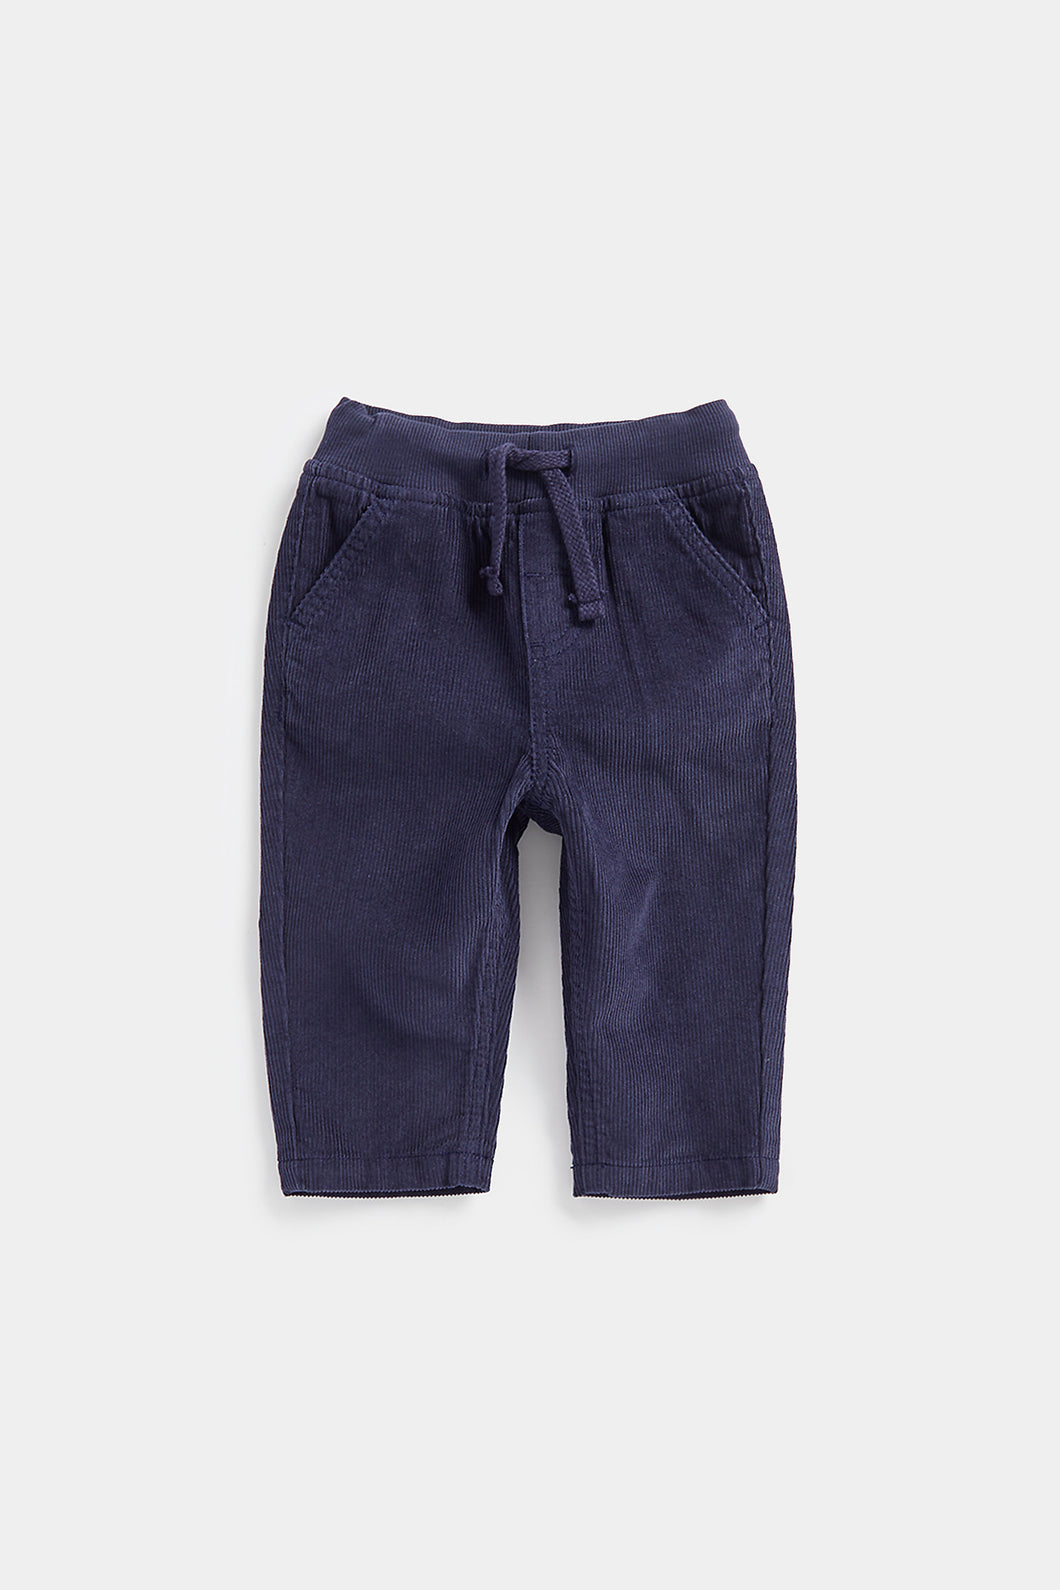 Mothercare Navy Cord Trousers